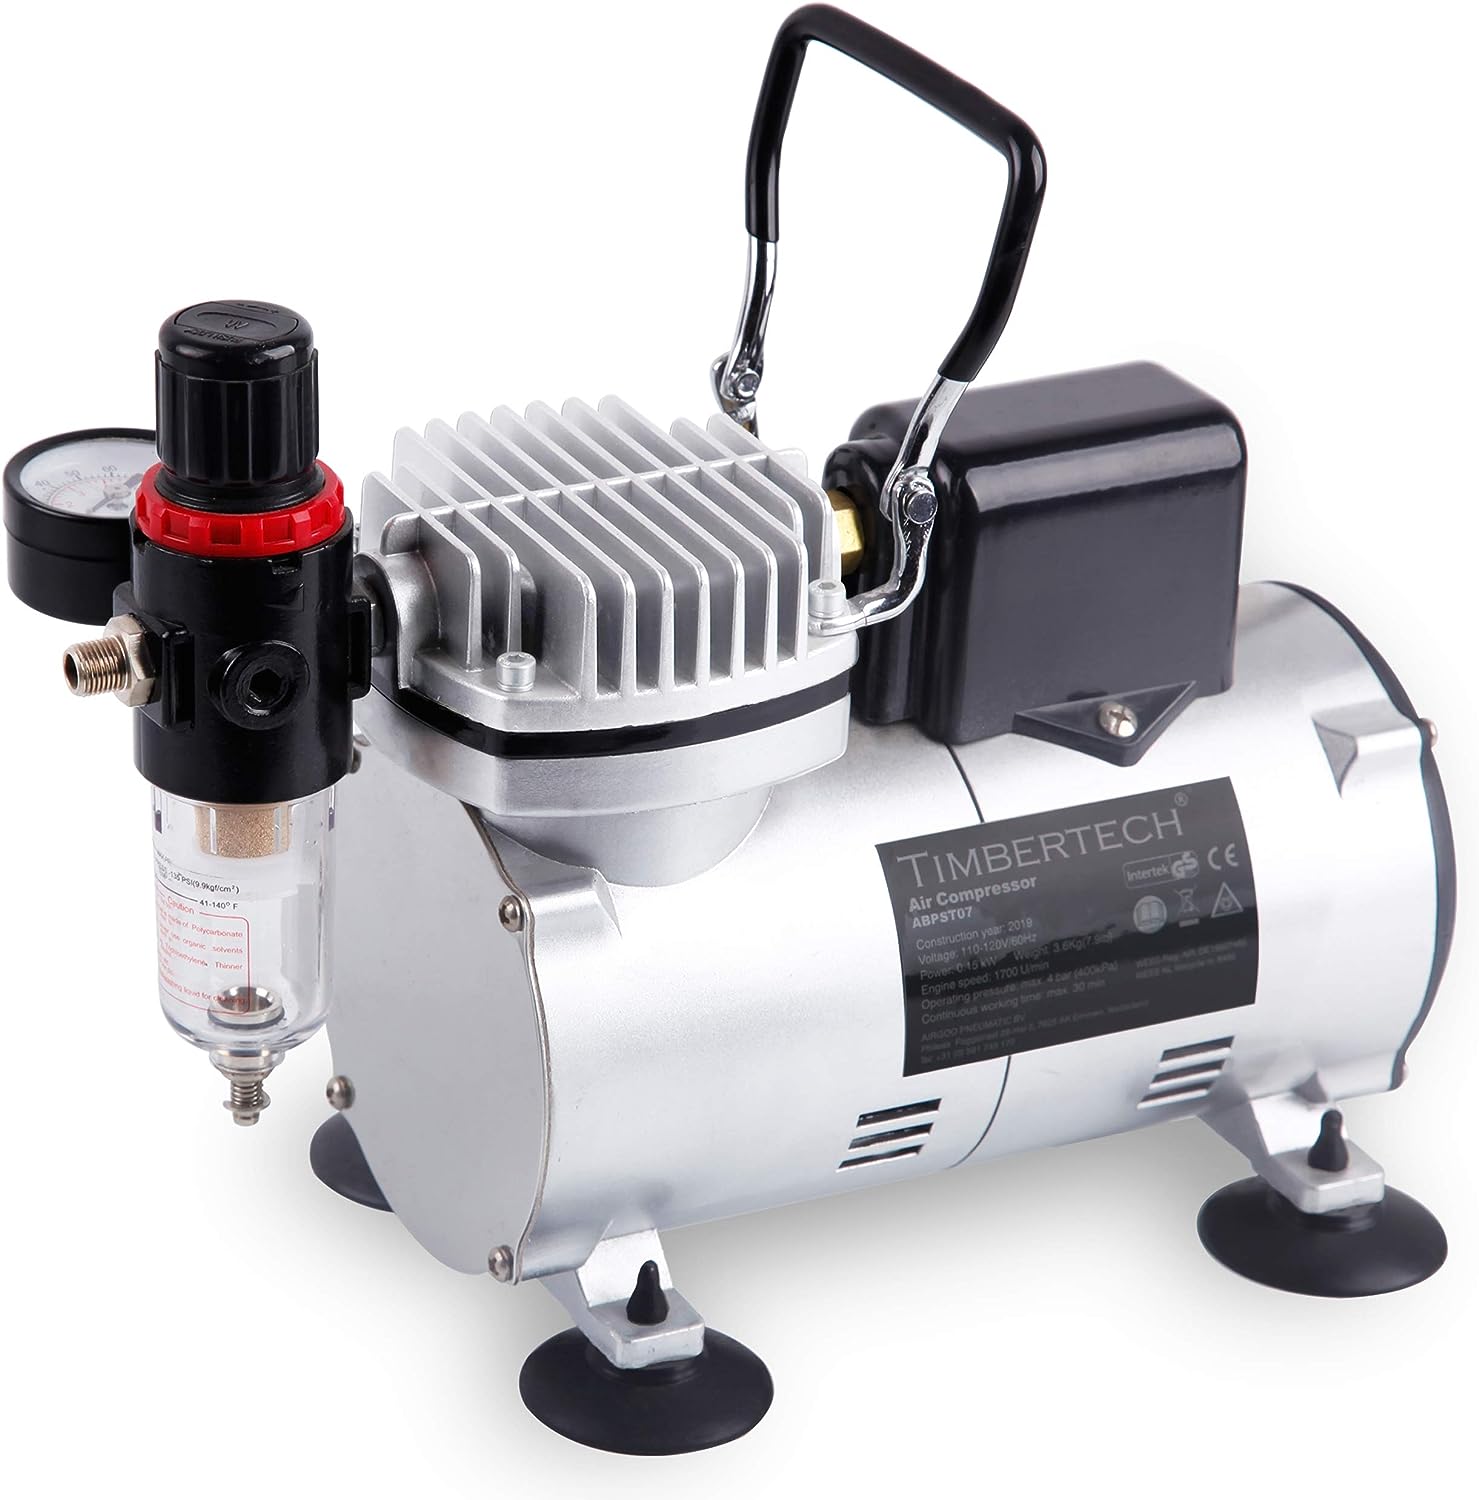 TIMBERTECH Upgraded Airbrush Compressor with Motor [...]